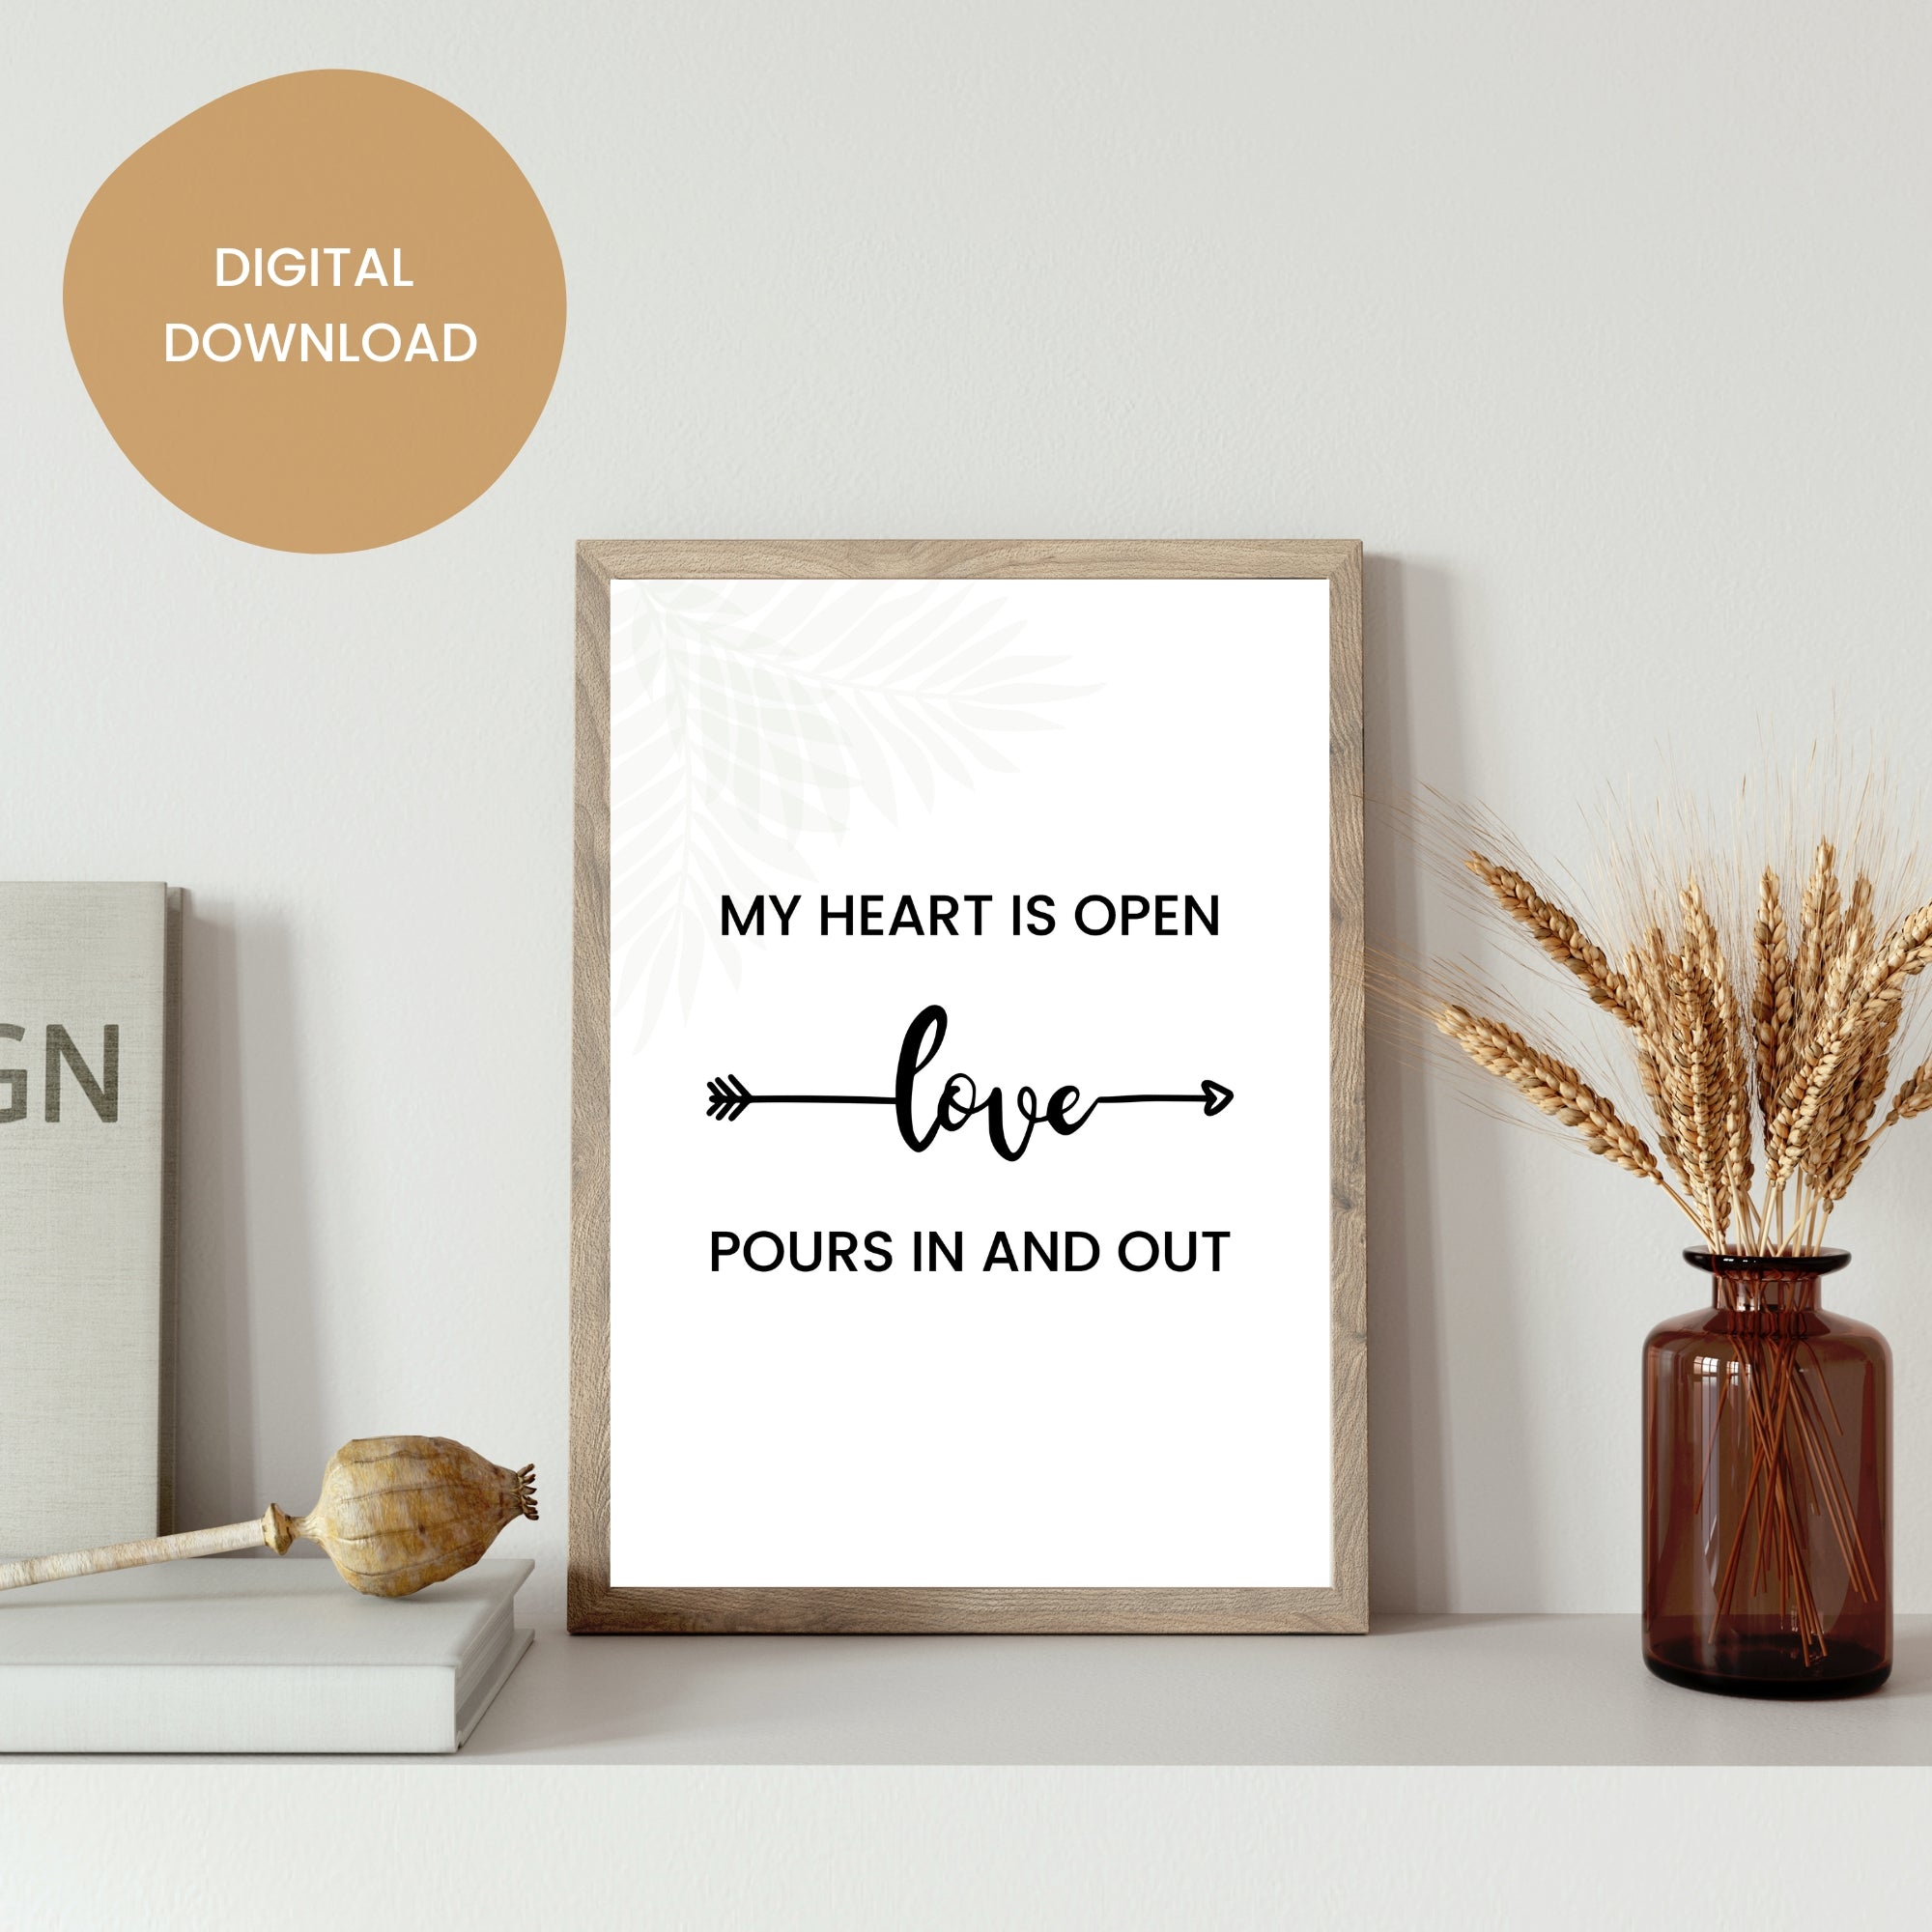 Inspirational Woman's Wall Art Pack: 6 Posters